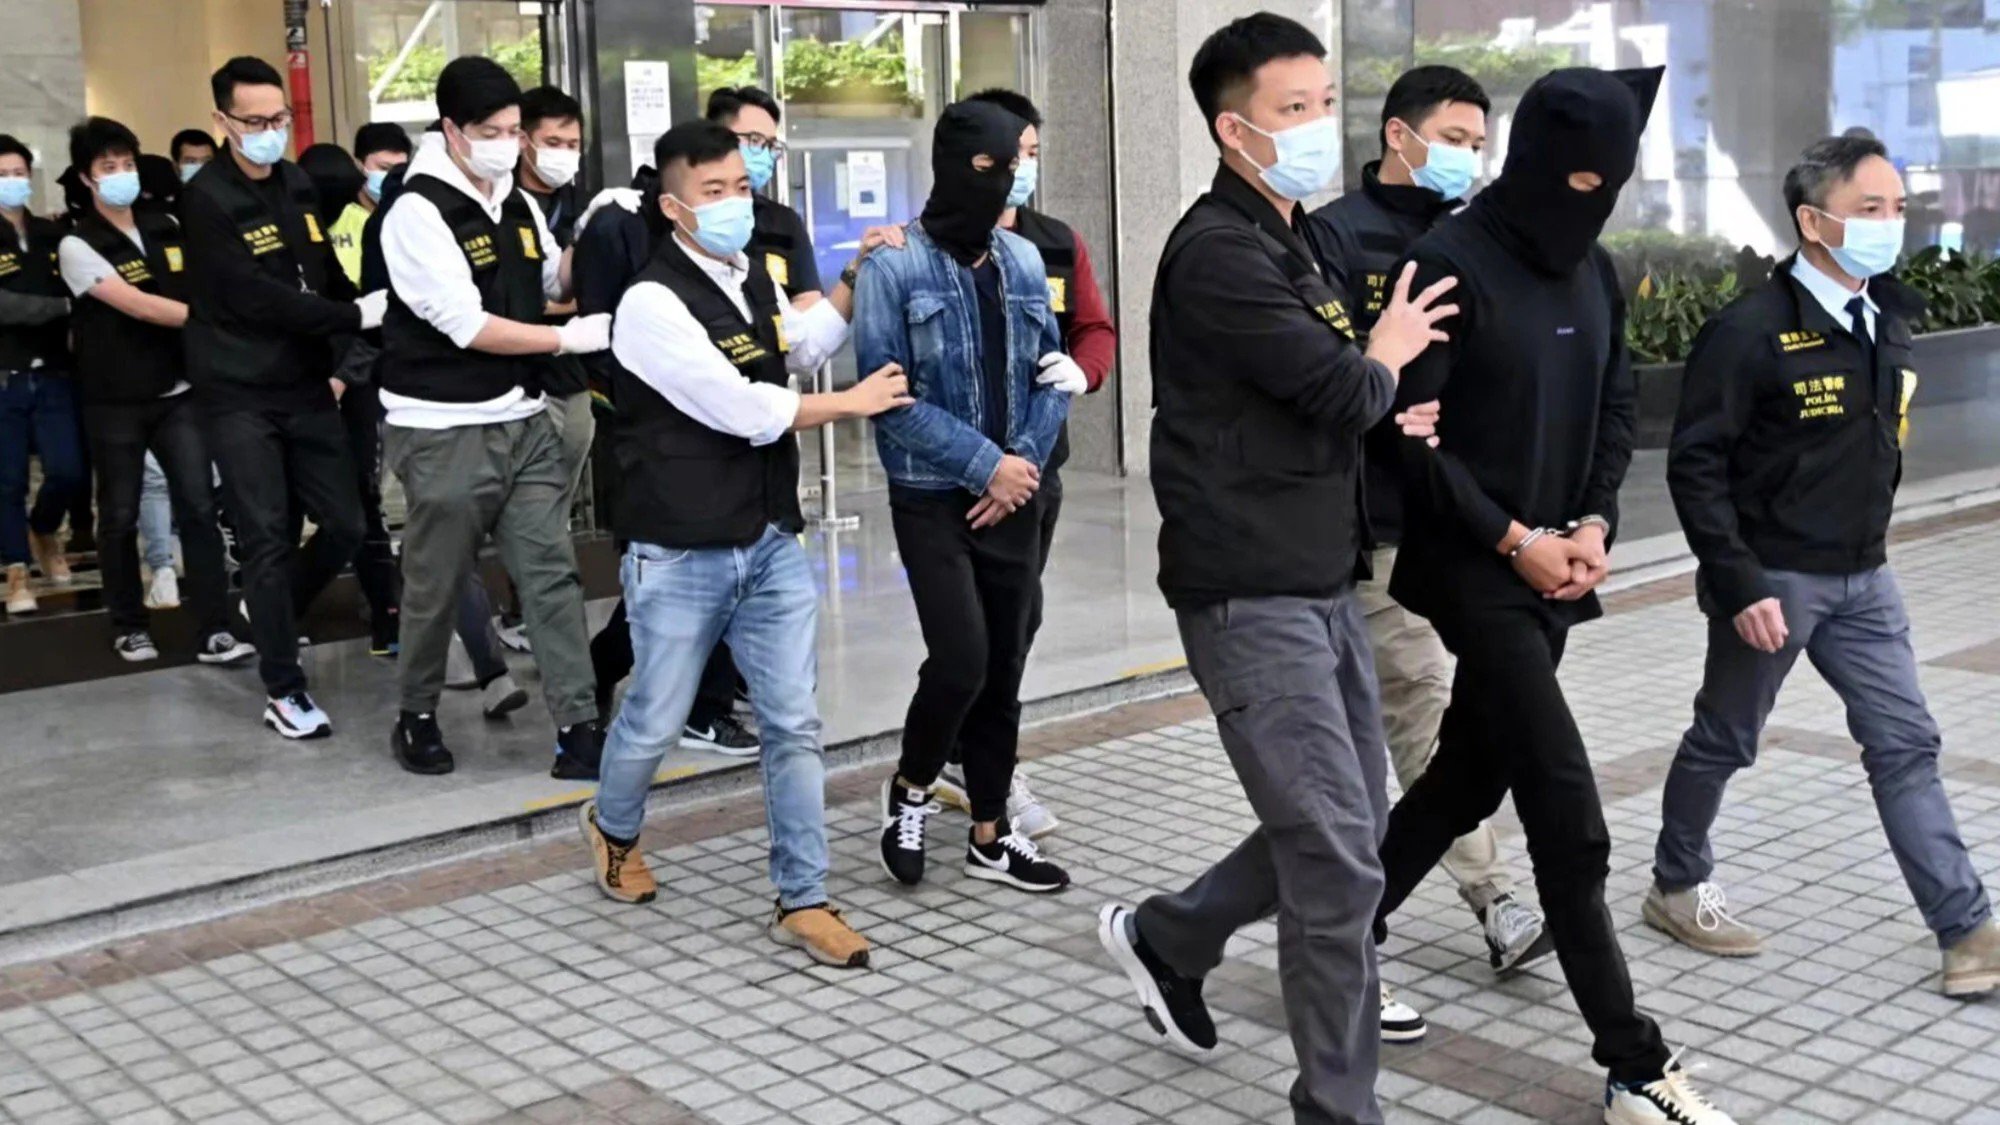 Macau: 36 sentenced to jail in Wenzhou court on trial linked to former junket boss Alvin Chau